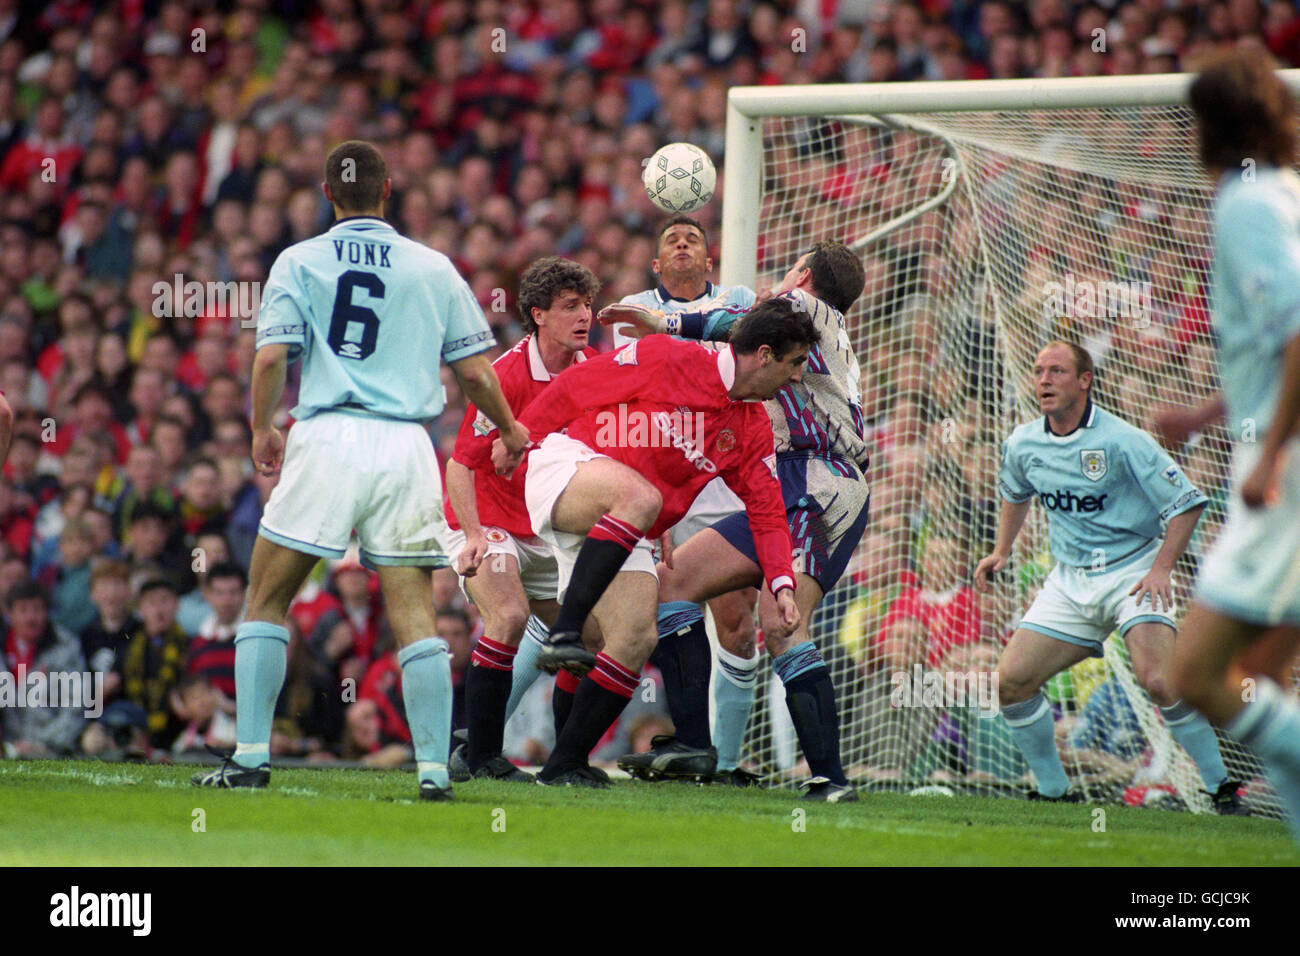 Manchester City defender Keith Curle heads the ball away from Manchester United strikers Mark Hughes and Eric Cantona. Stock Photo